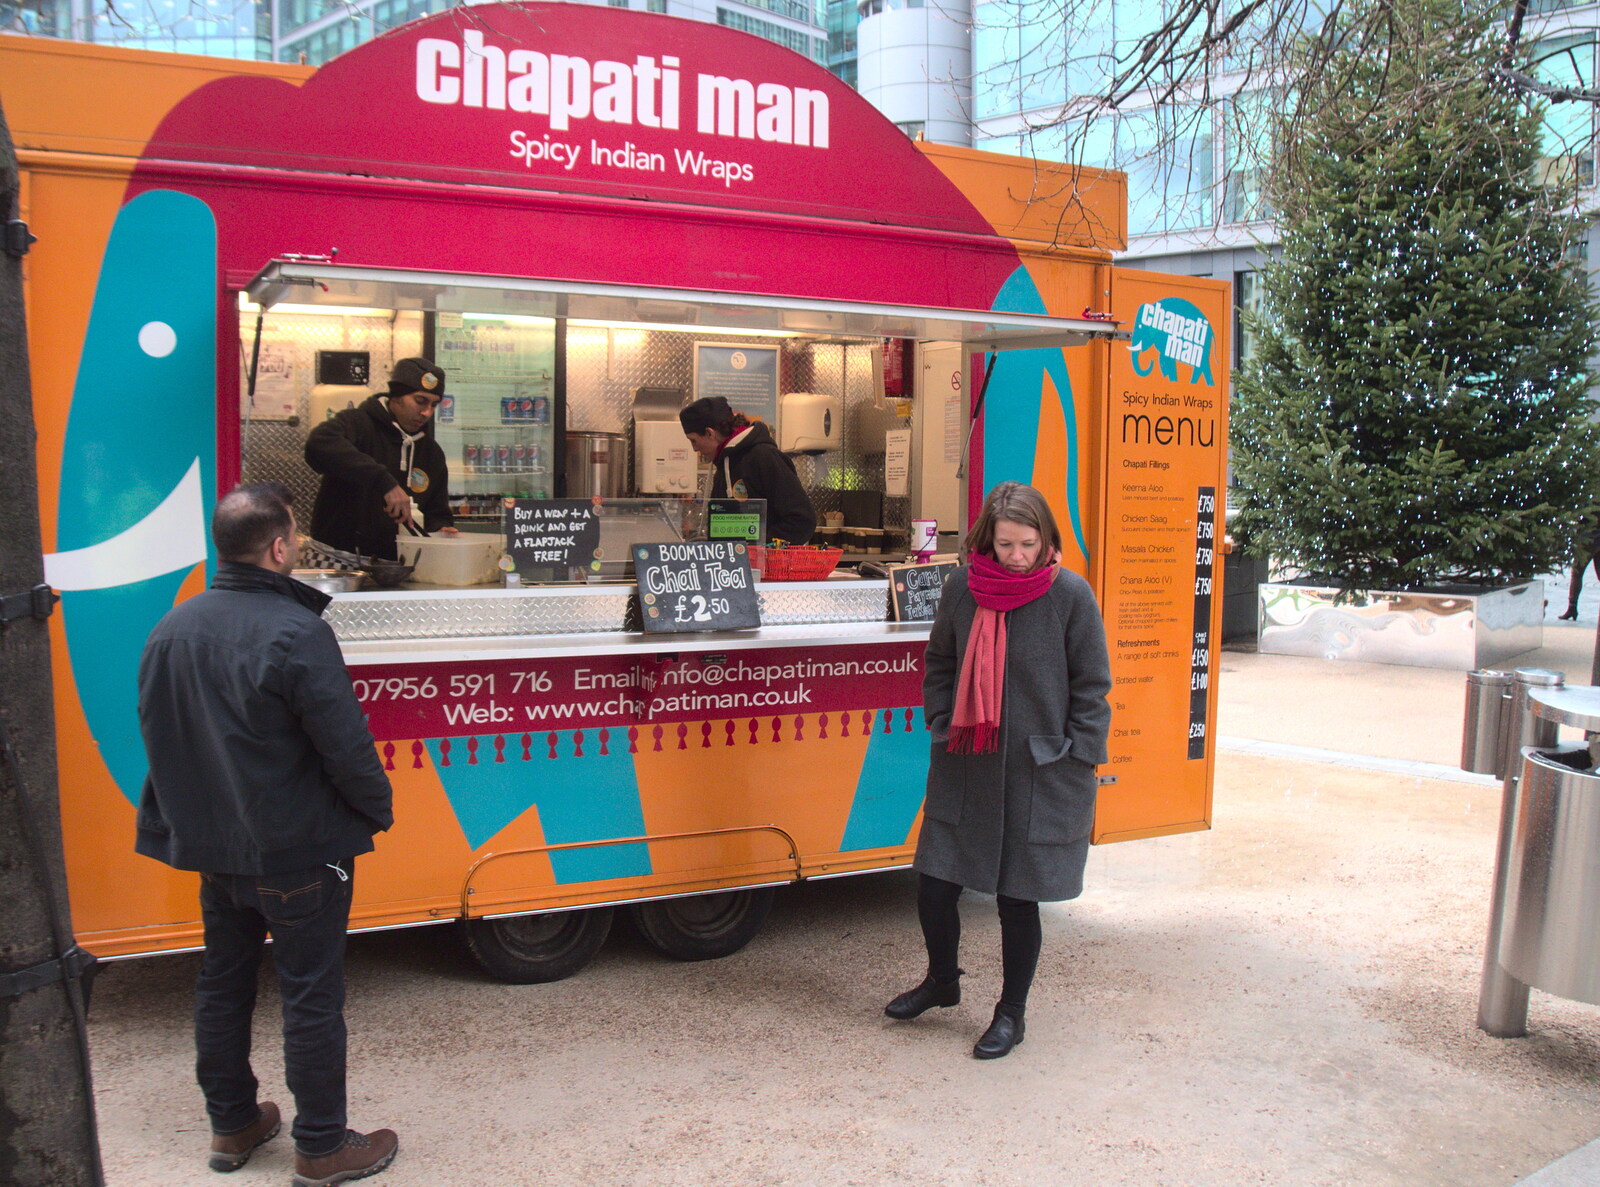 The Chapati Man van in the Sheldon Square pit from Reindeer Two Ways, Paddington and Suffolk - 19th December 2017